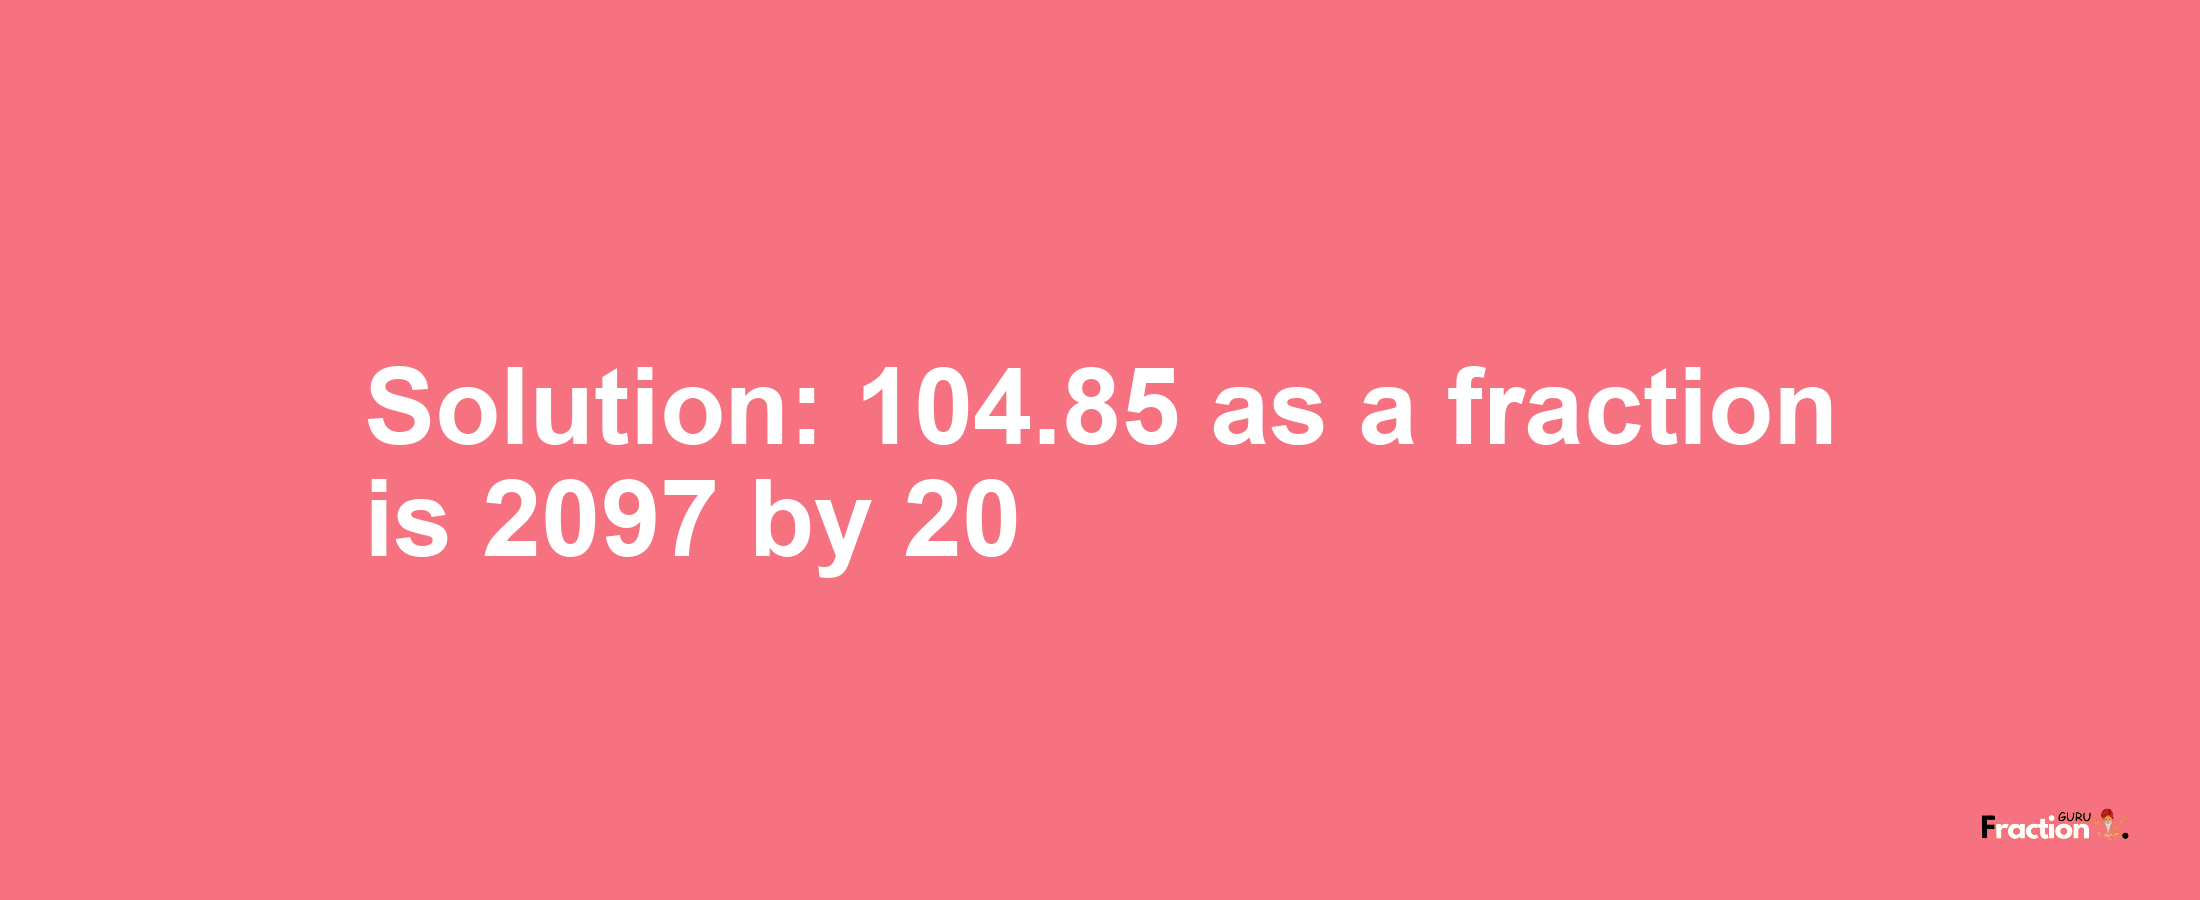 Solution:104.85 as a fraction is 2097/20